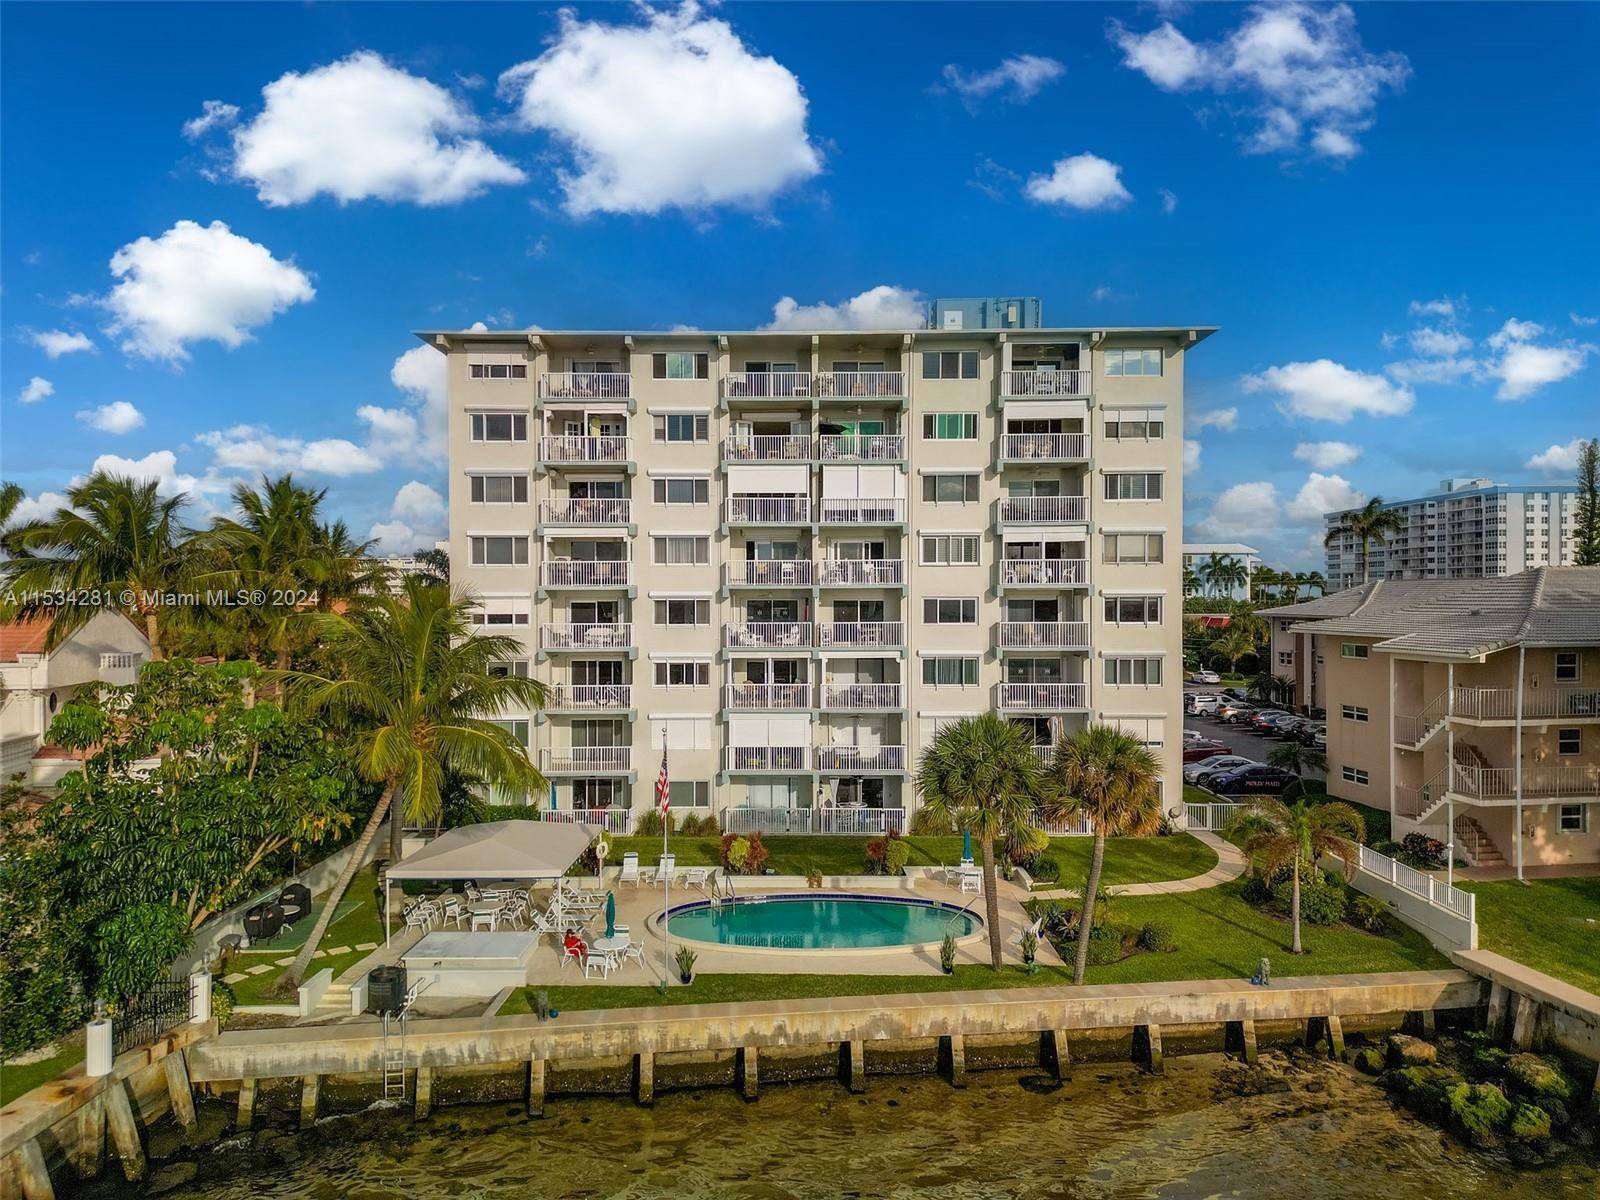 This exquisite unit offers a blend of luxurious coastal living with breathtaking views of both the Intracoastal Waterway from its balcony and views of the ocean from the front with ...